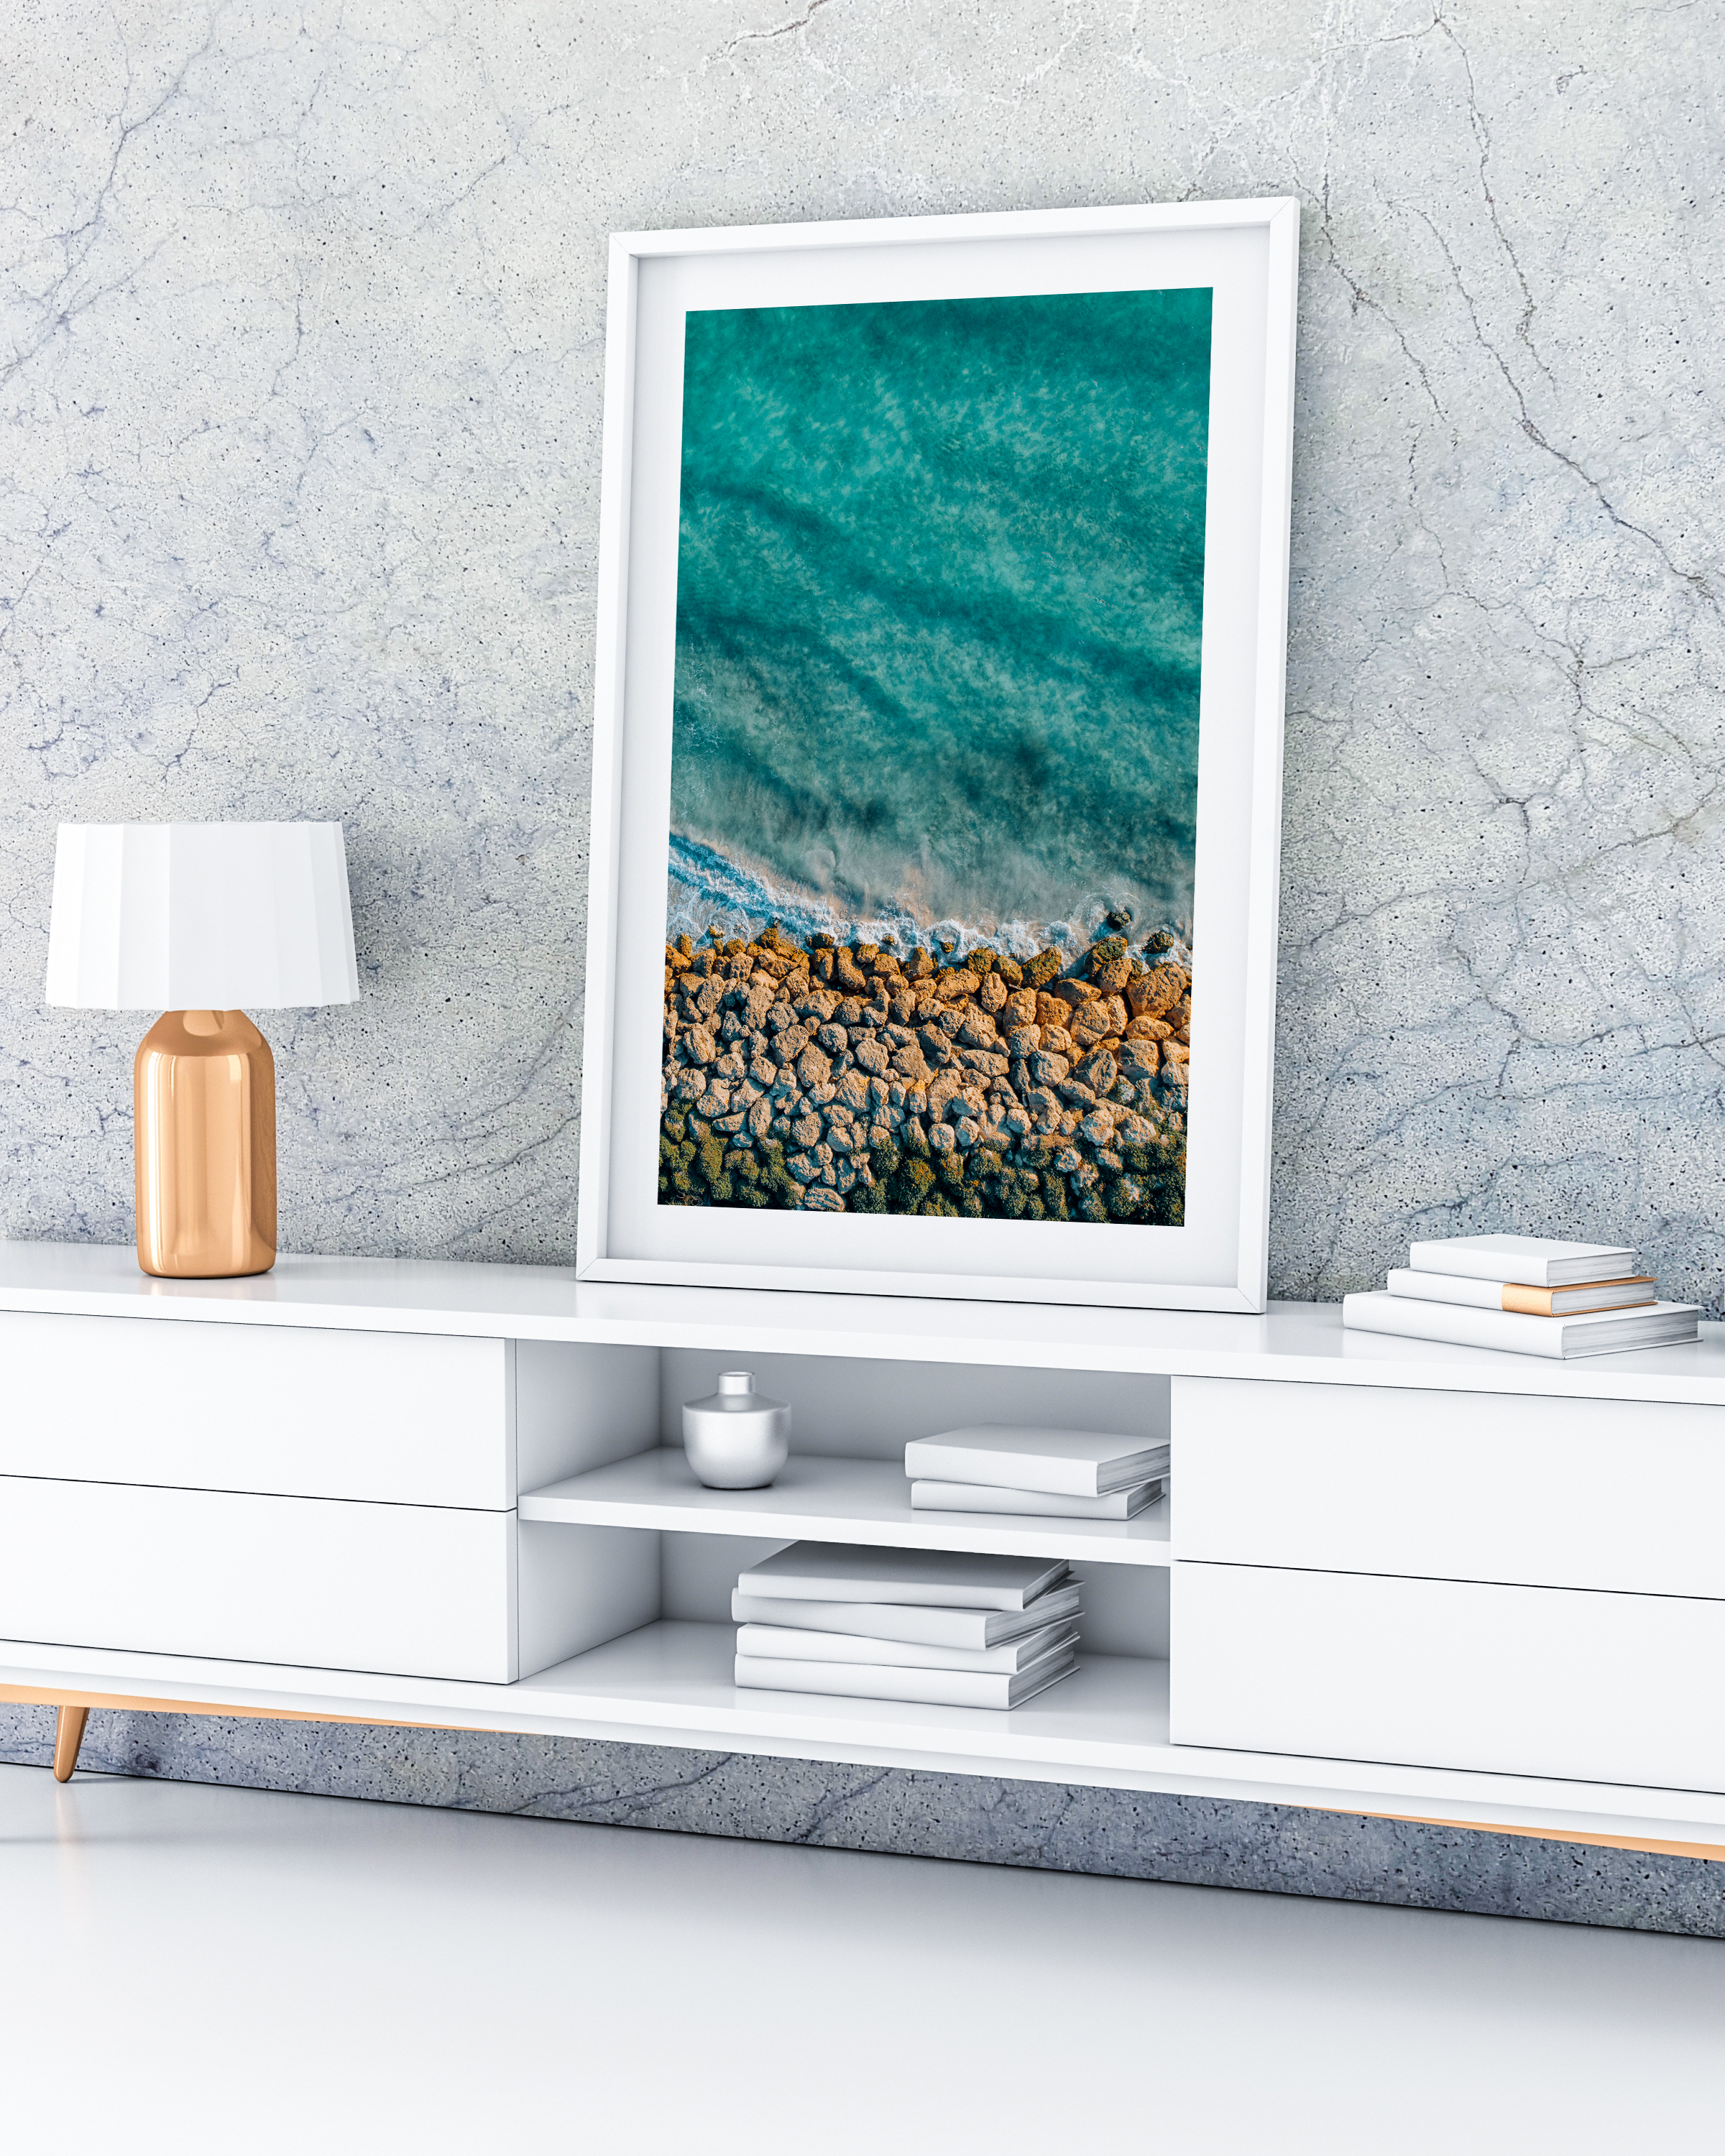 A print of a rocky shoreline in a white frame, sitting on a white buffet. There is a grey wall behind it and a white and gold lamp next to it.